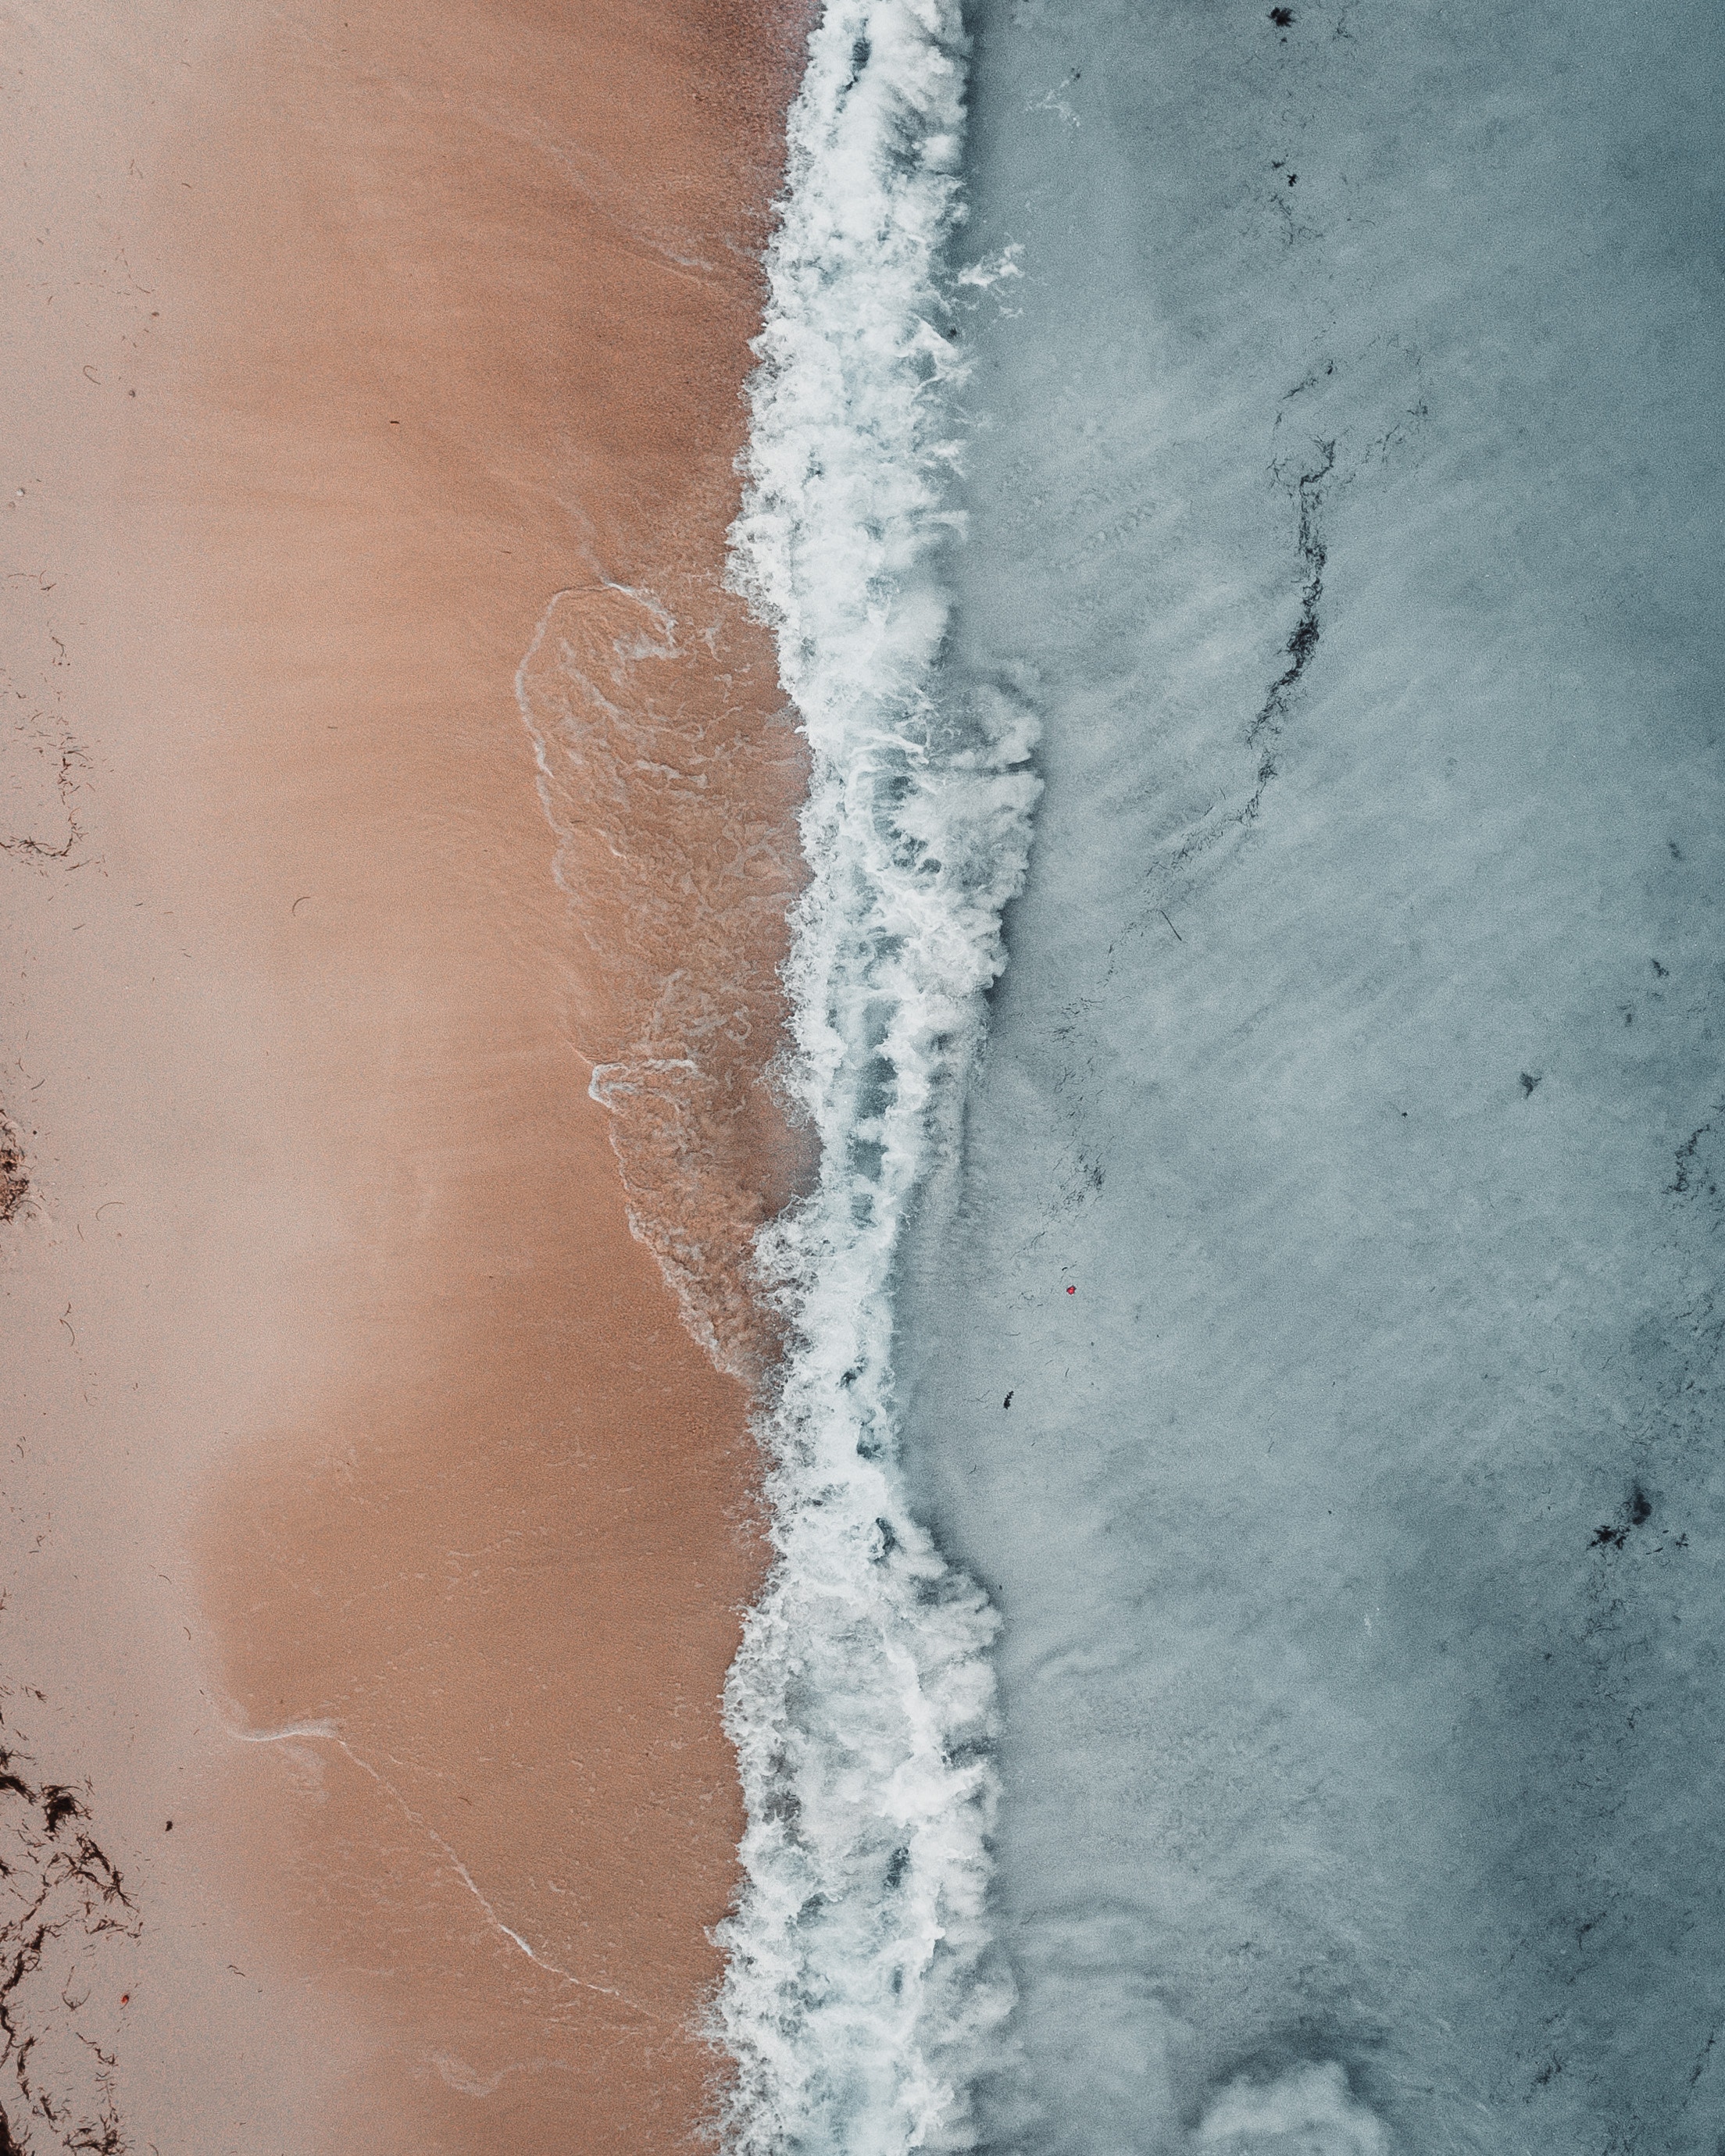 wave, view from above, nature, sand, shore, bank, ocean, surf